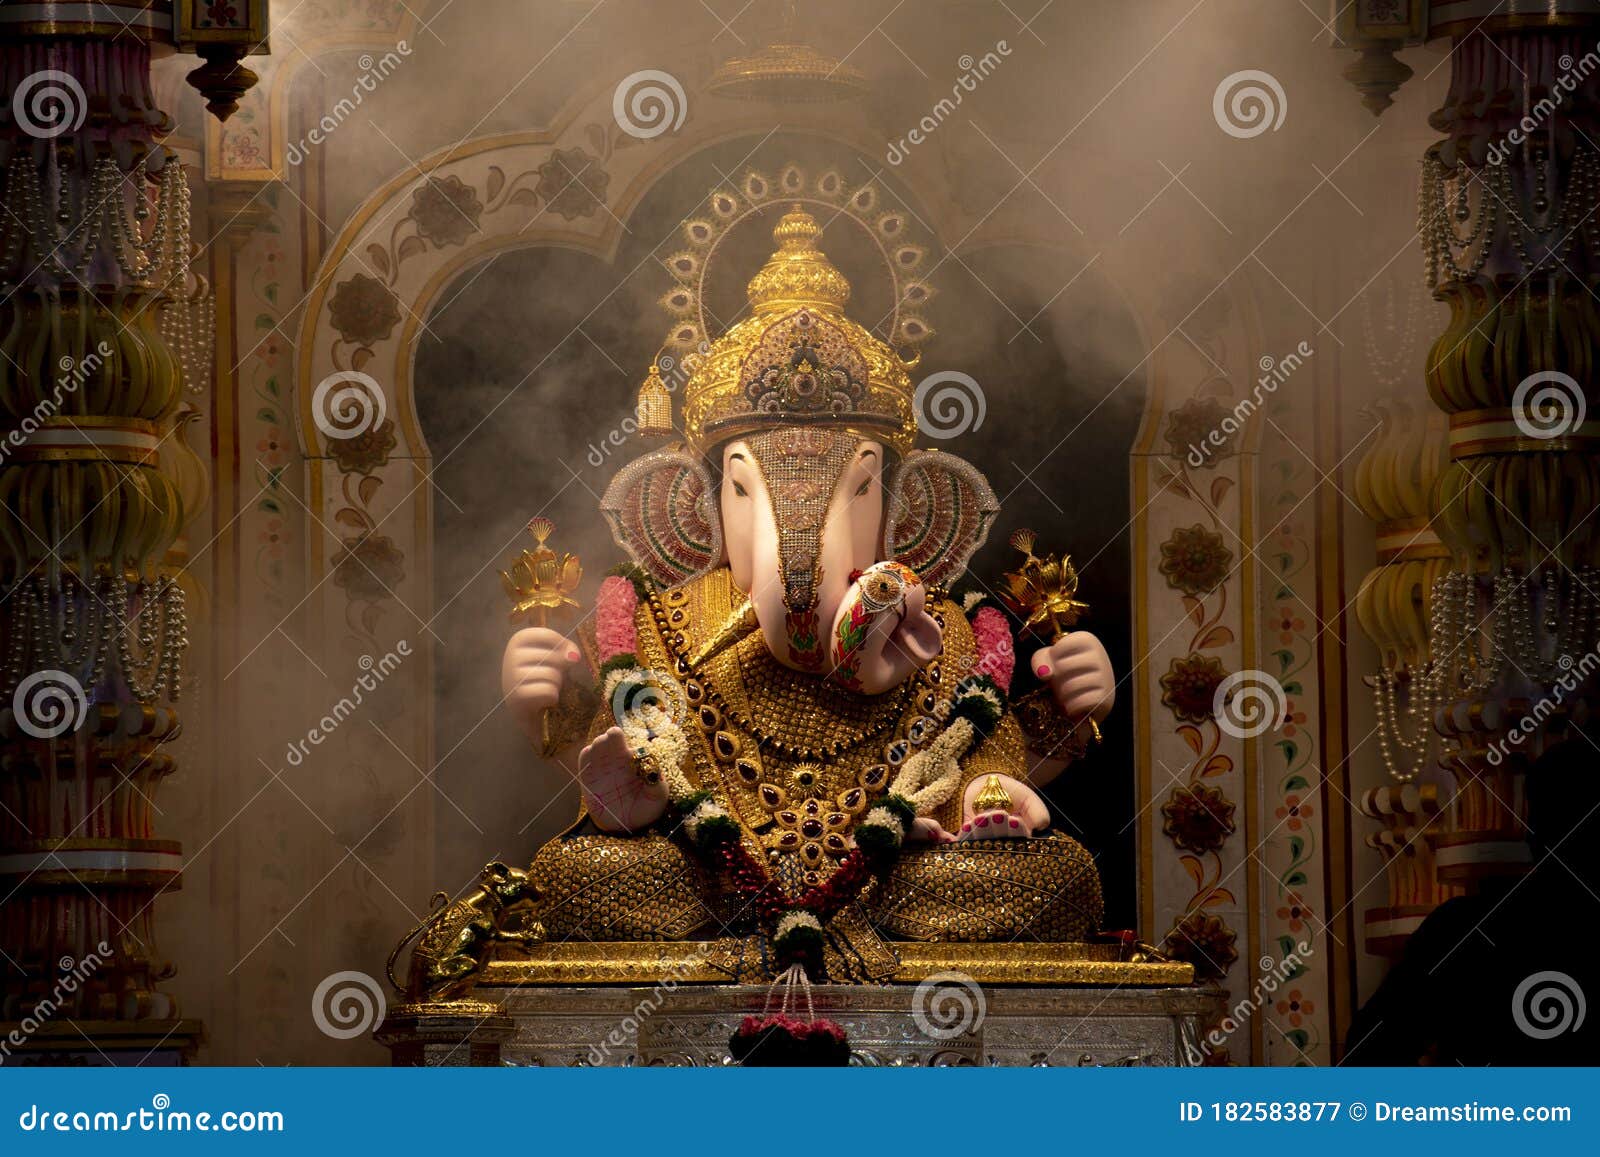 Dagdusheth Ganapati Idol at Pune with Golden Jewellery in the ...